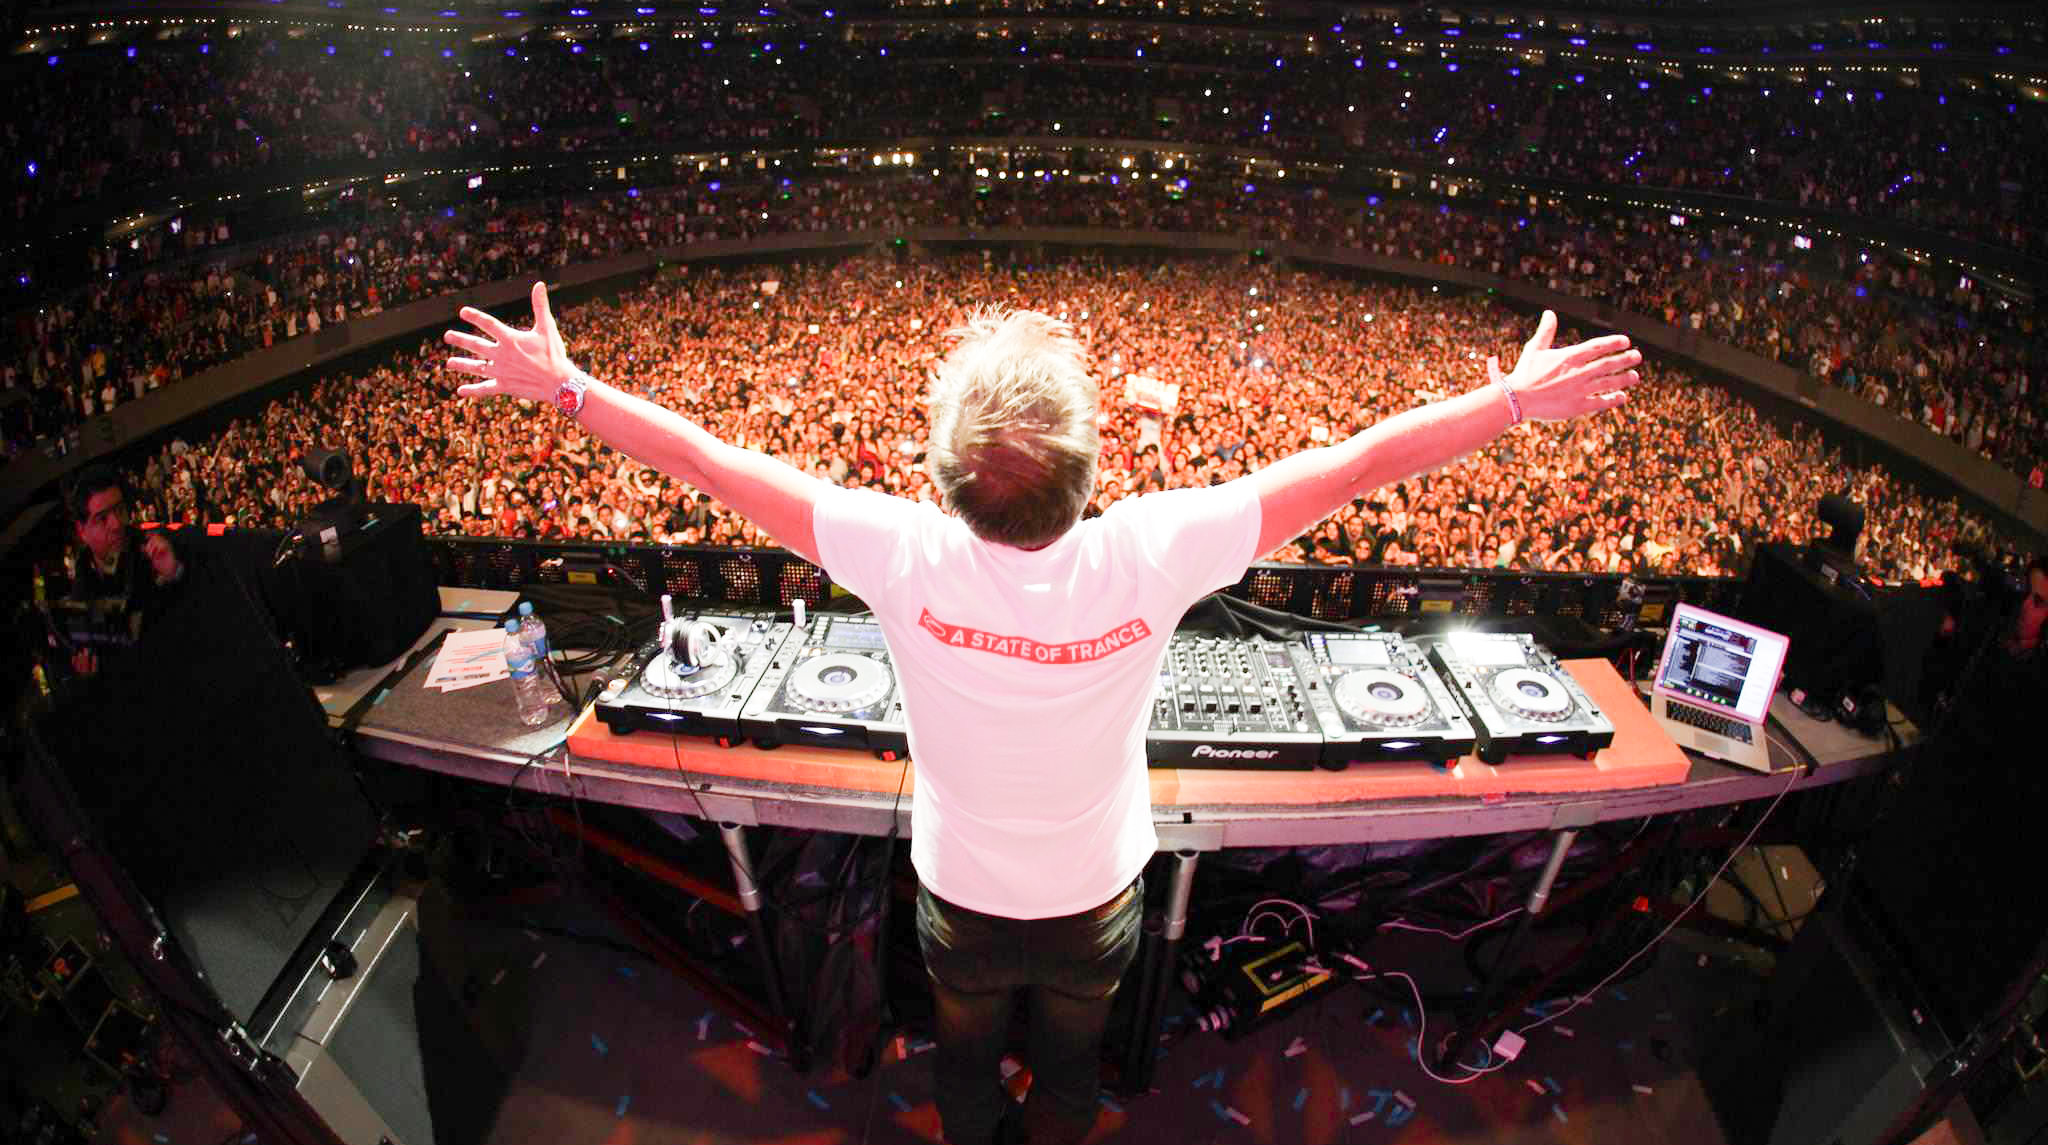 A State Of Trance México